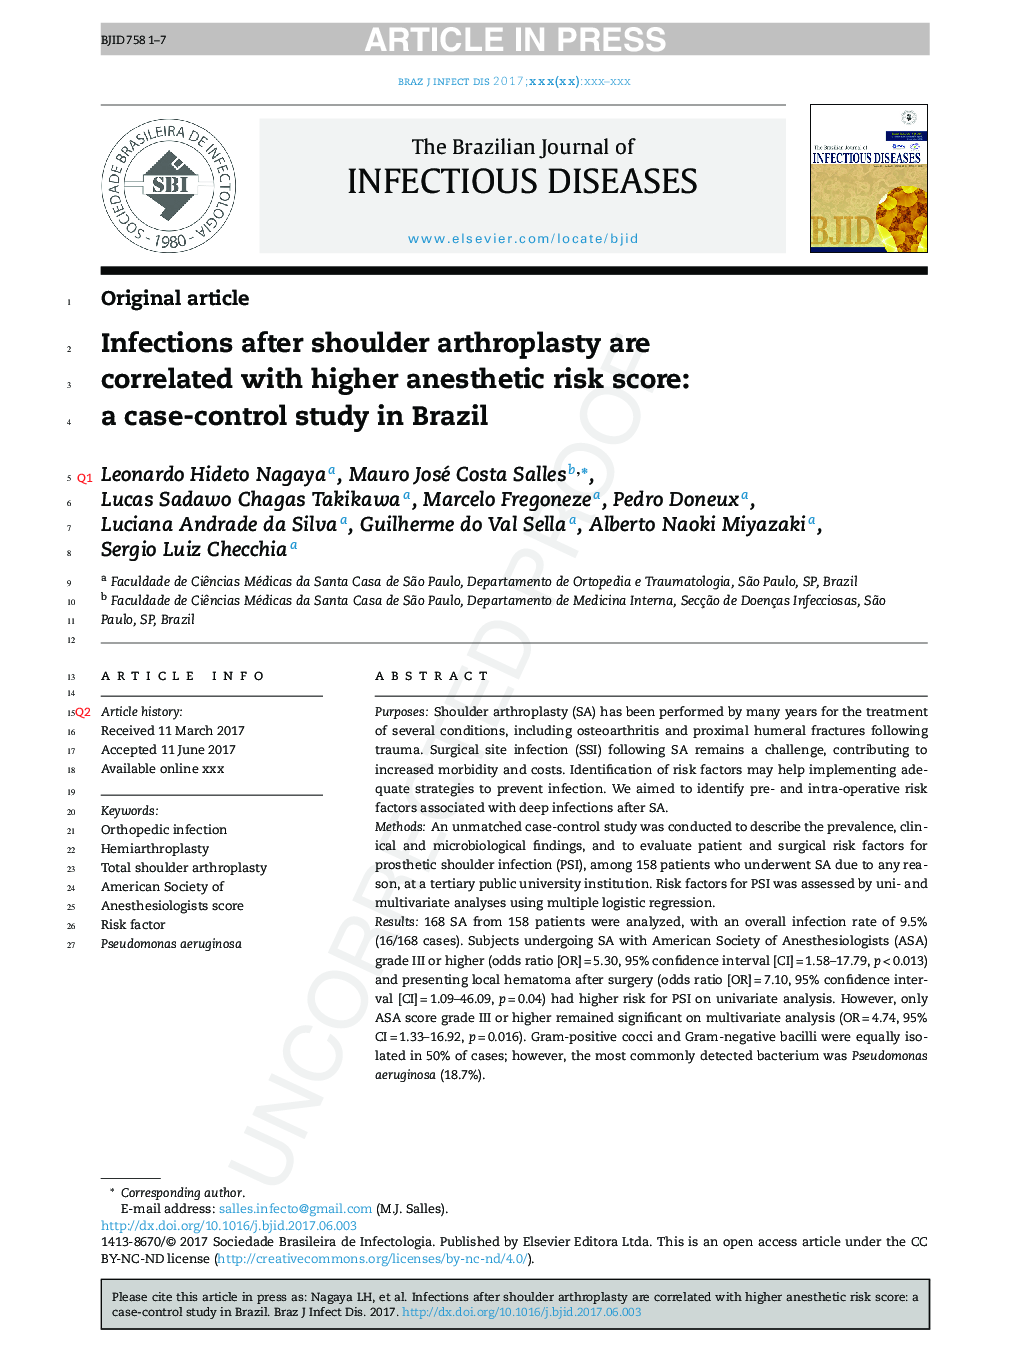 Infections after shoulder arthroplasty are correlated with higher anesthetic risk score: a case-control study in Brazil